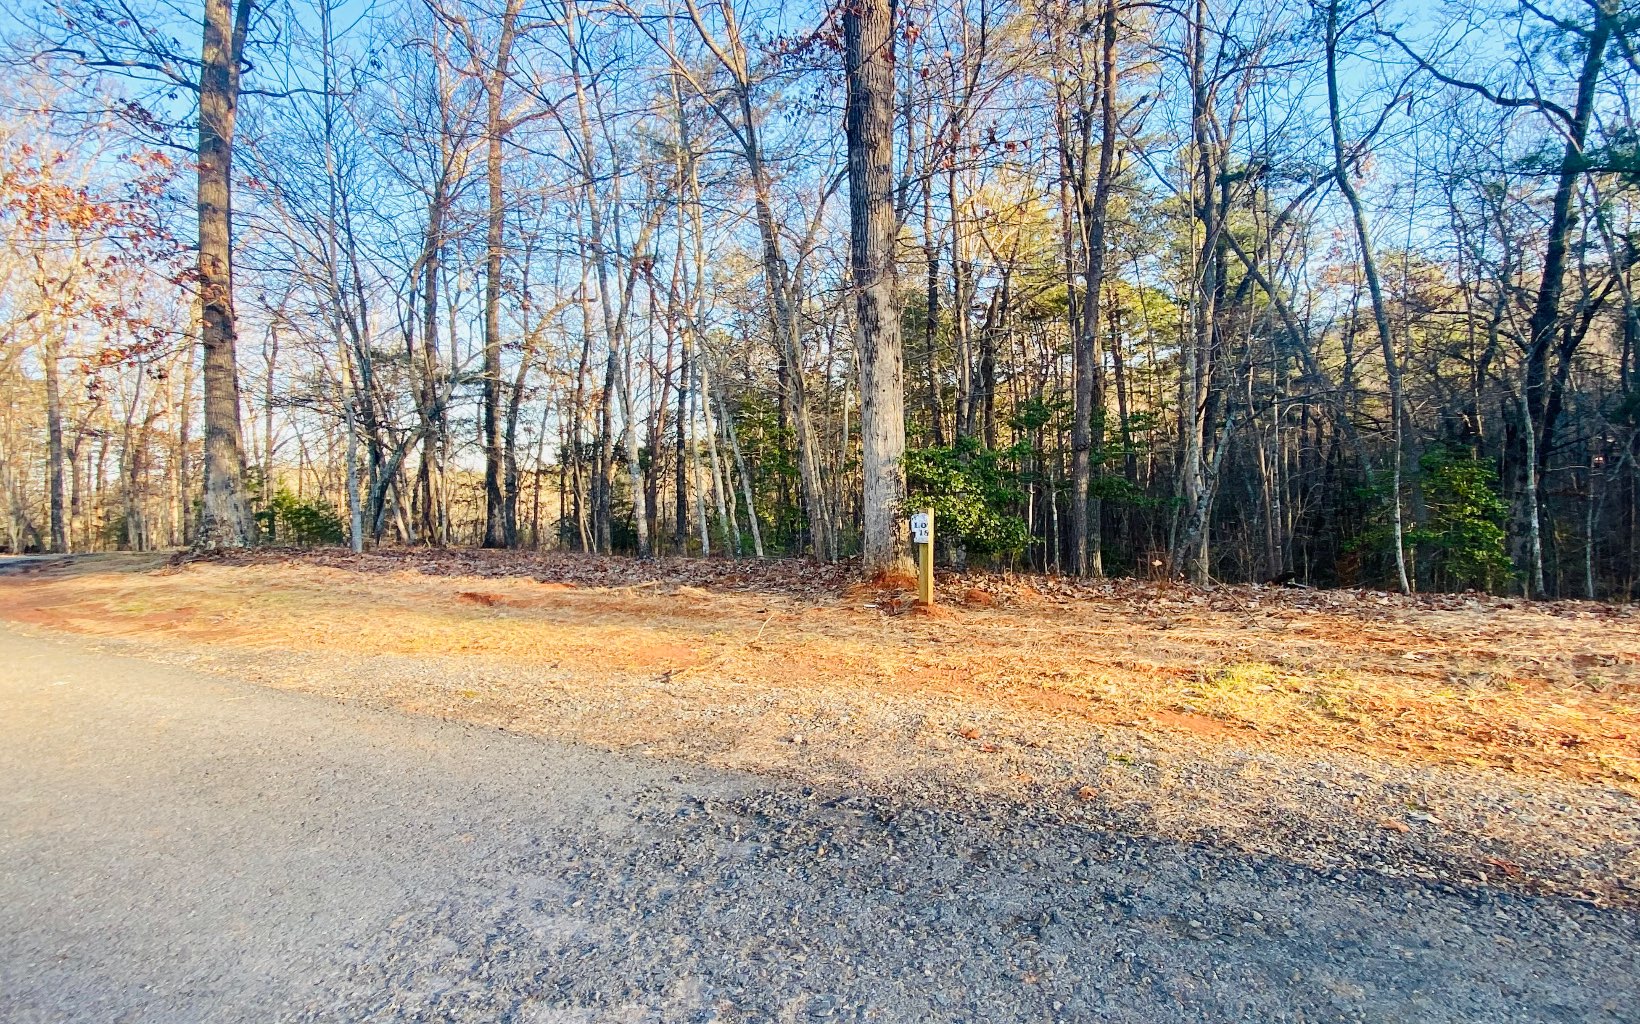 Perfect Location to build your Dream Home or Mountain Retreat! This 1.41 acre lot is located in the popular upscale Ivy Ridge Estates which is known as one of the most desirable communities in the area. It is Conveniently tucked away between historic downtown Blue Ridge & McCaysville. This lot is a gentle sloping terrain which is ideal for a house plan that includes a basement. It offers underground utilities, high speed internet, mature hardwoods, Seasonal Mountains views, all paved easy access & is located within a cul de sac for additional privacy & ease of building. All within minutes to the Hospital, Medical facilities, Schools & so much more. It's a must see as this is one of the best lots remaining in IVY RIDGE ESTATES. This is a gorgeous community with reasonable HOA fees so Bring your builder & grab Your Plans....This Lot will not last! It's truly the perfect location! Welcome to Ivy Ridge Estates...Welcome Home!